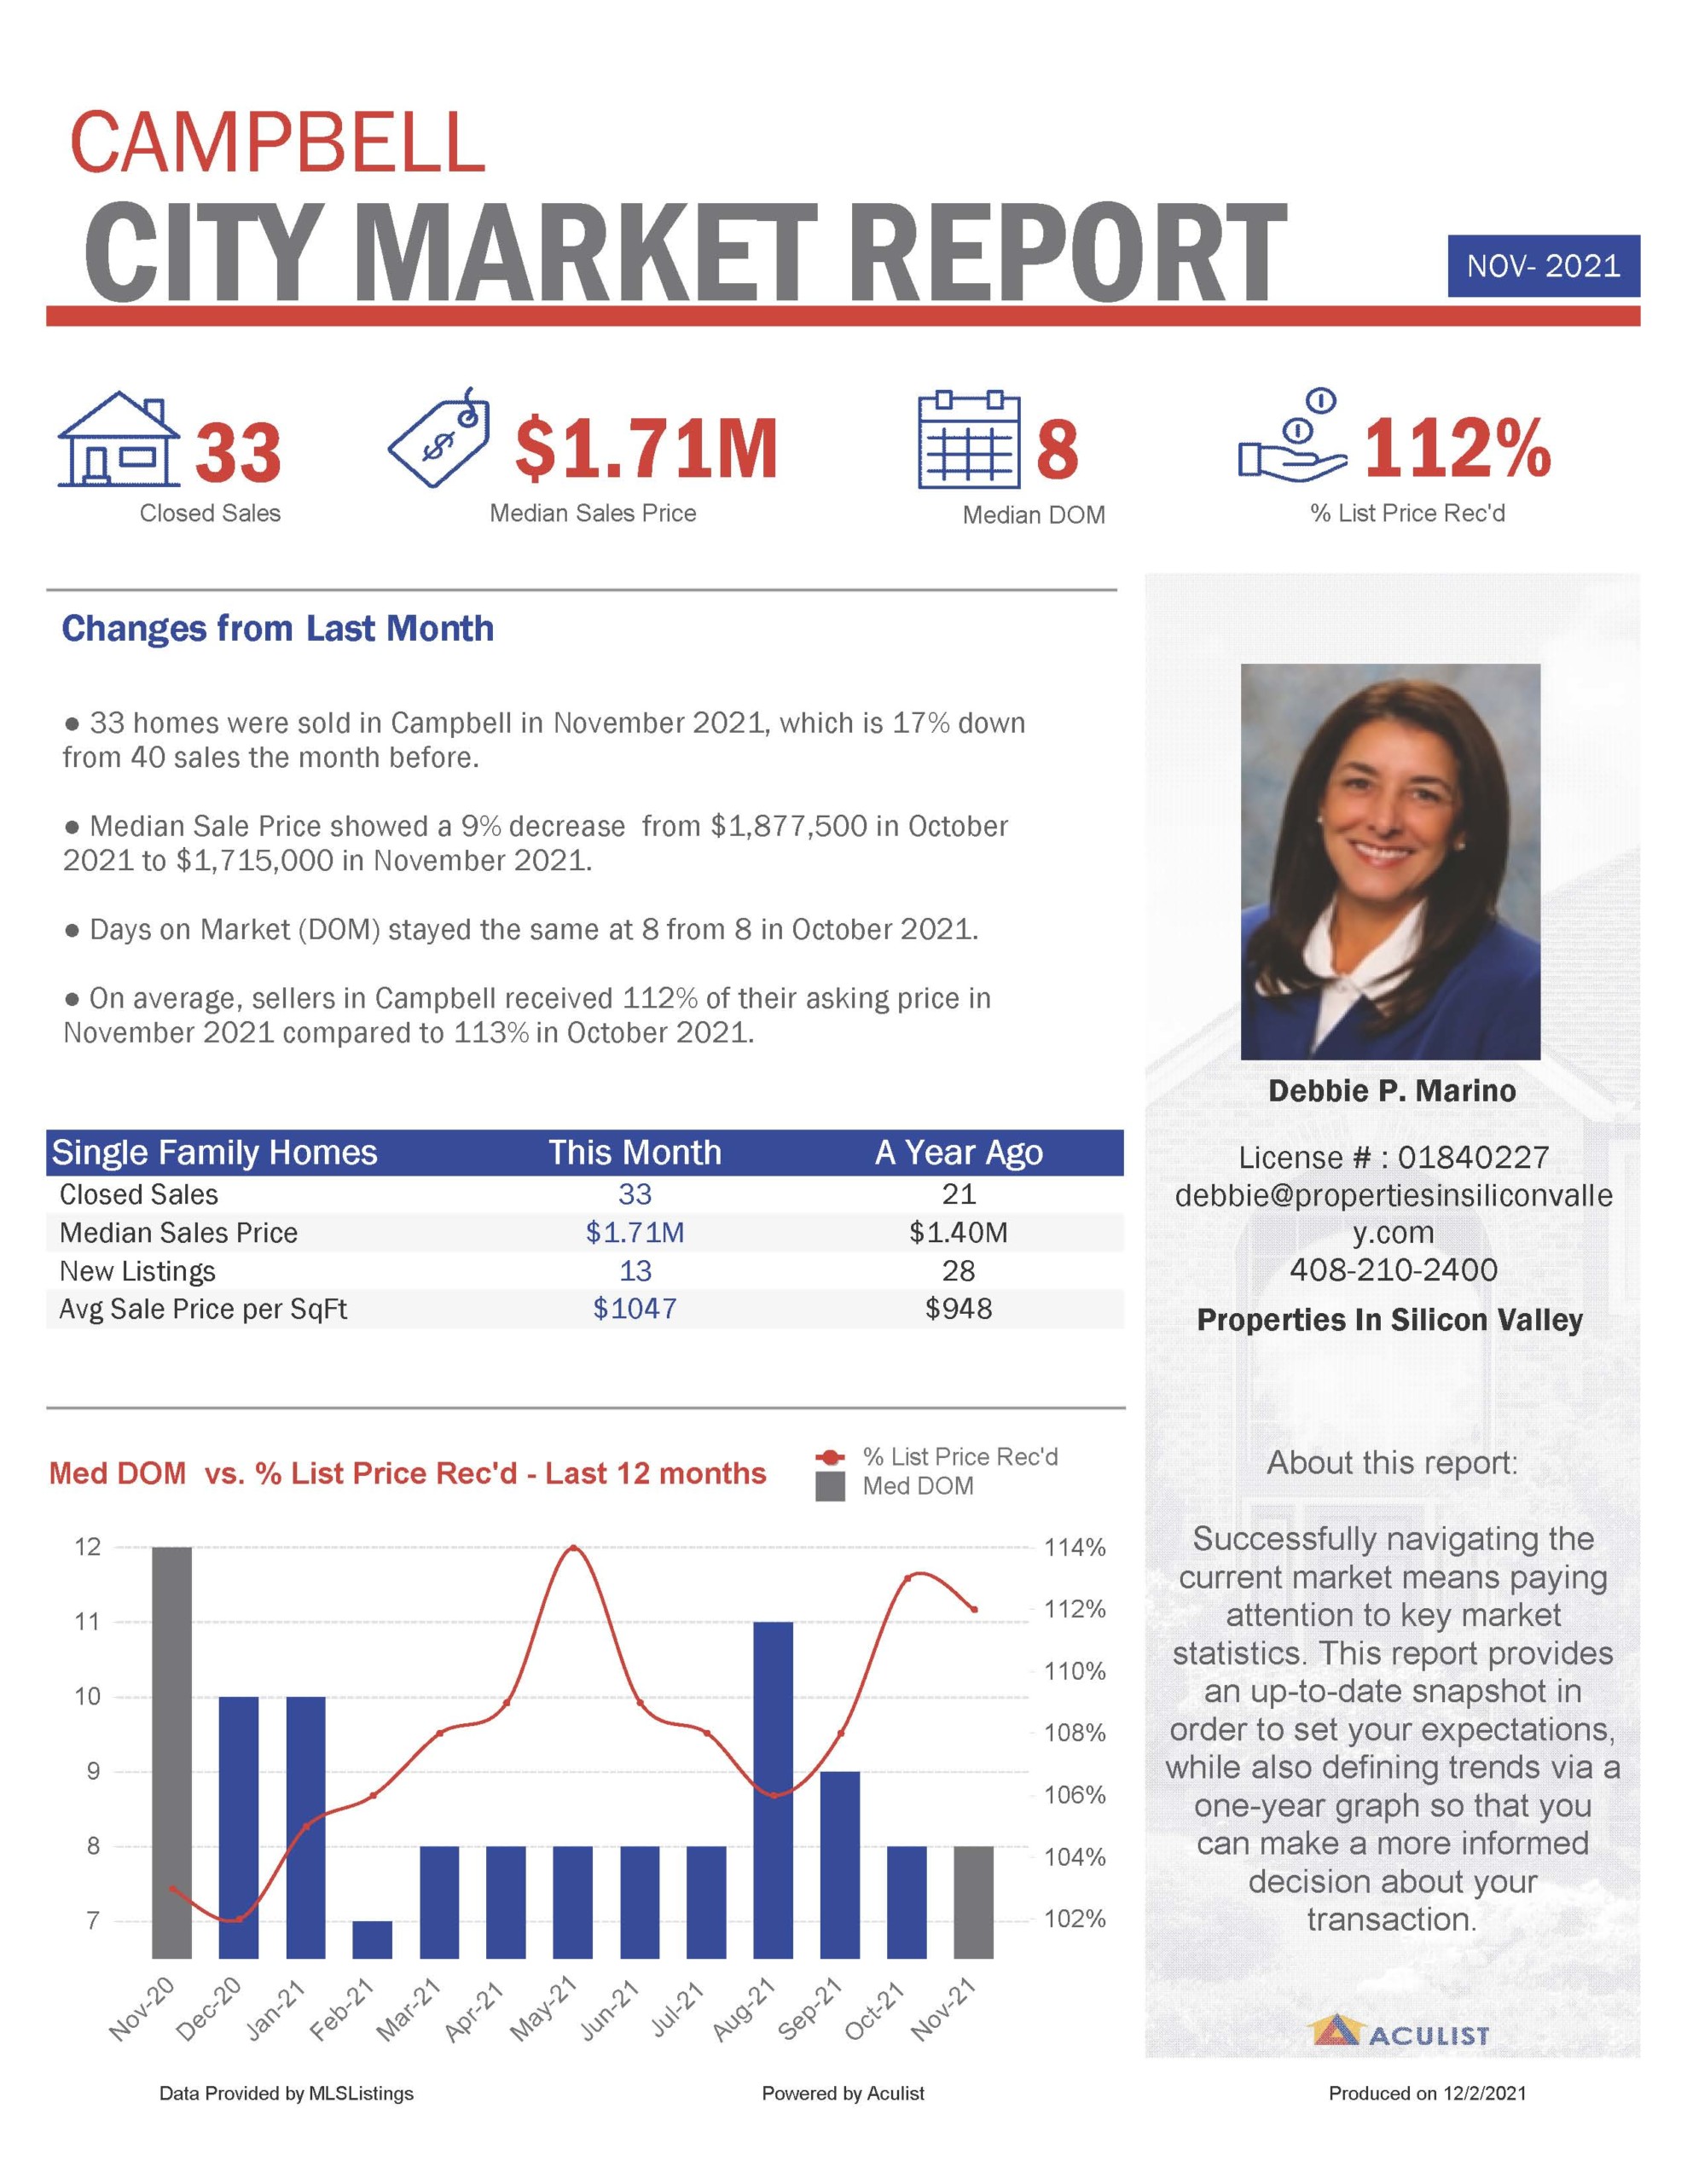 City of Campbell, CA Market Report for November 2021